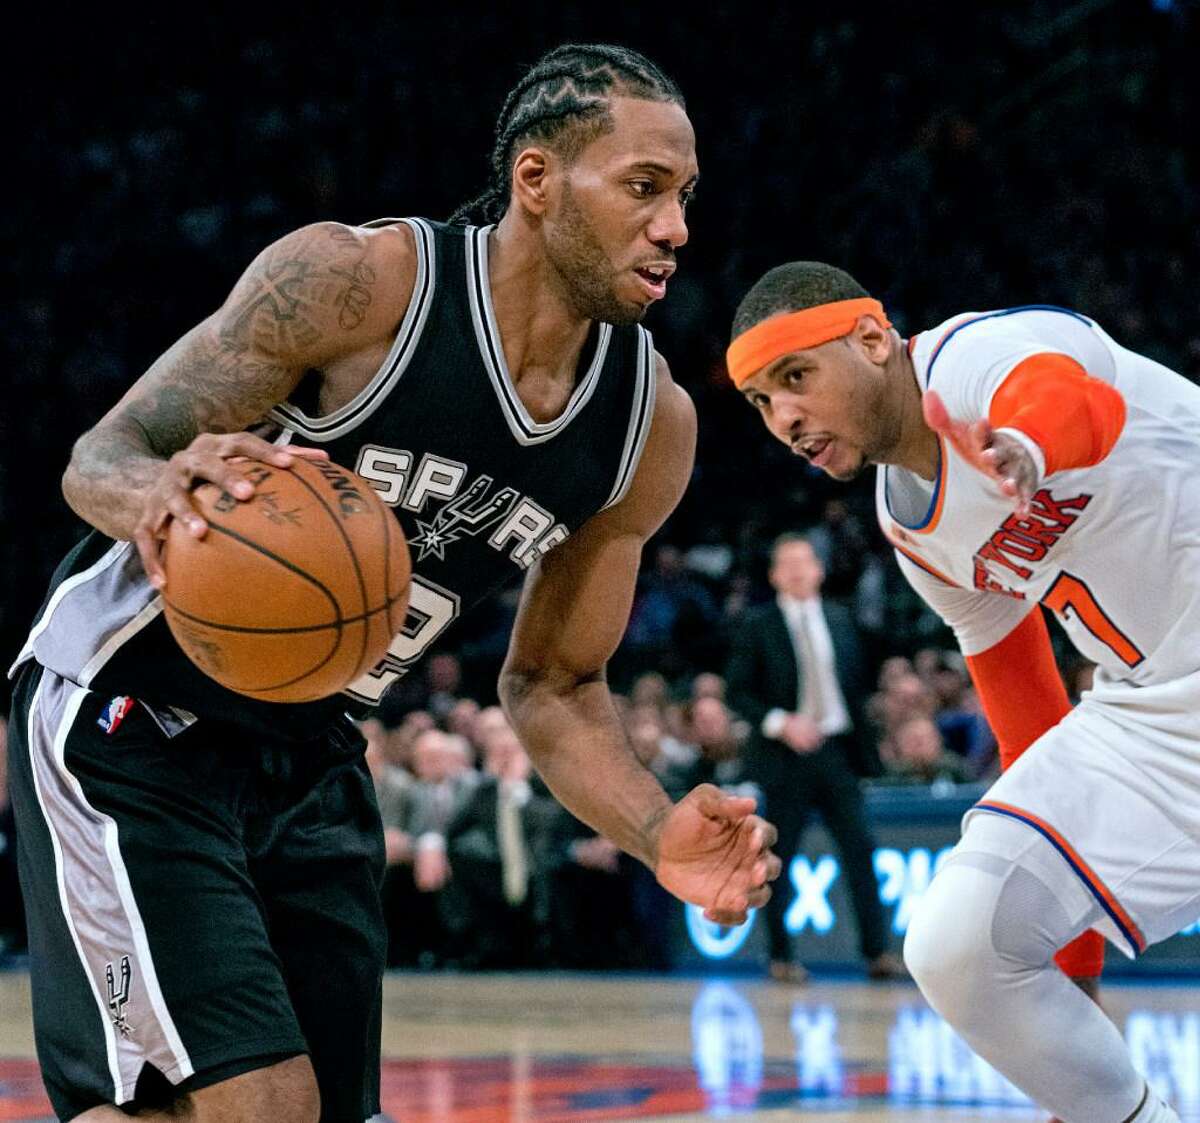 San Antonio Spurs forward Kawhi Leonard, left, drives to the basket past New York Knicks forward Carmelo Anthony in the second half of an NBA basketball game at Madison Square Garden in New York, Sunday, Feb. 12, 2017.